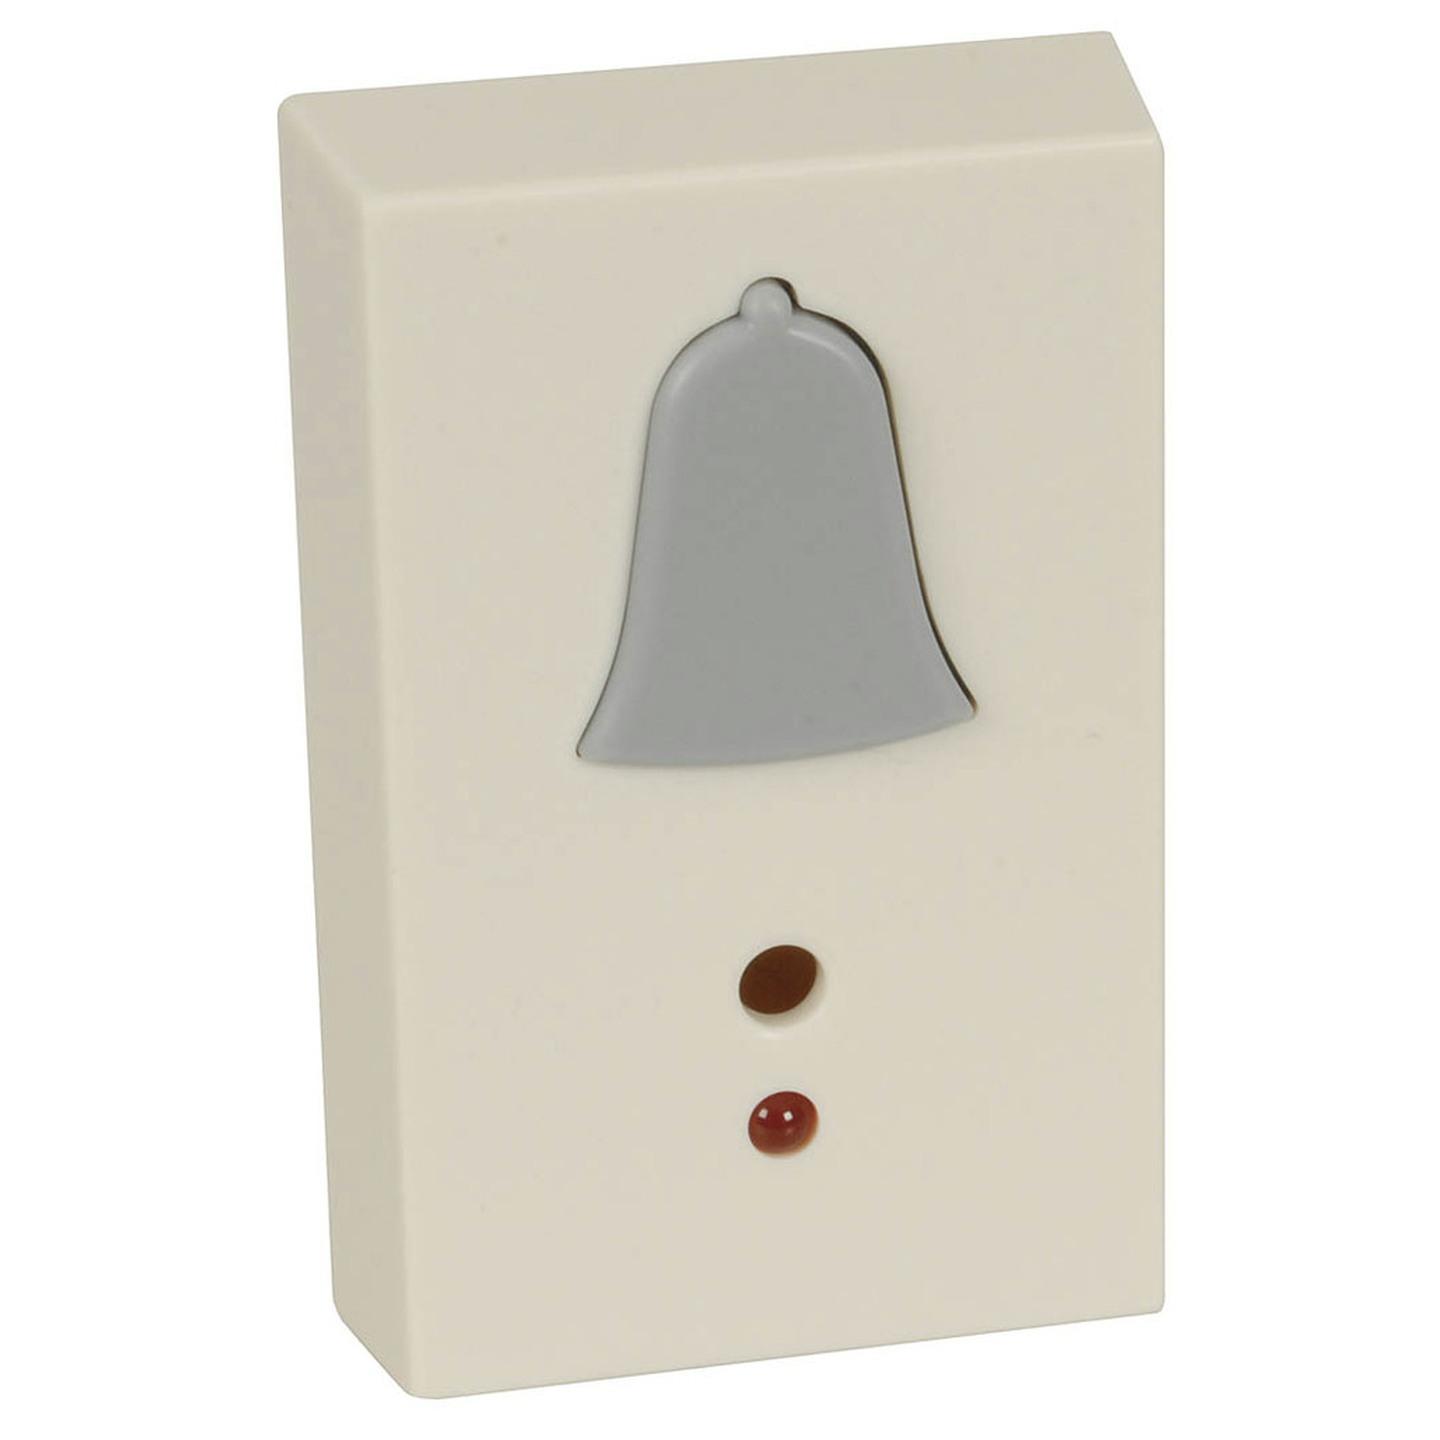 Door Bell Button Transmitter to suit LA-5172 and LA-5174